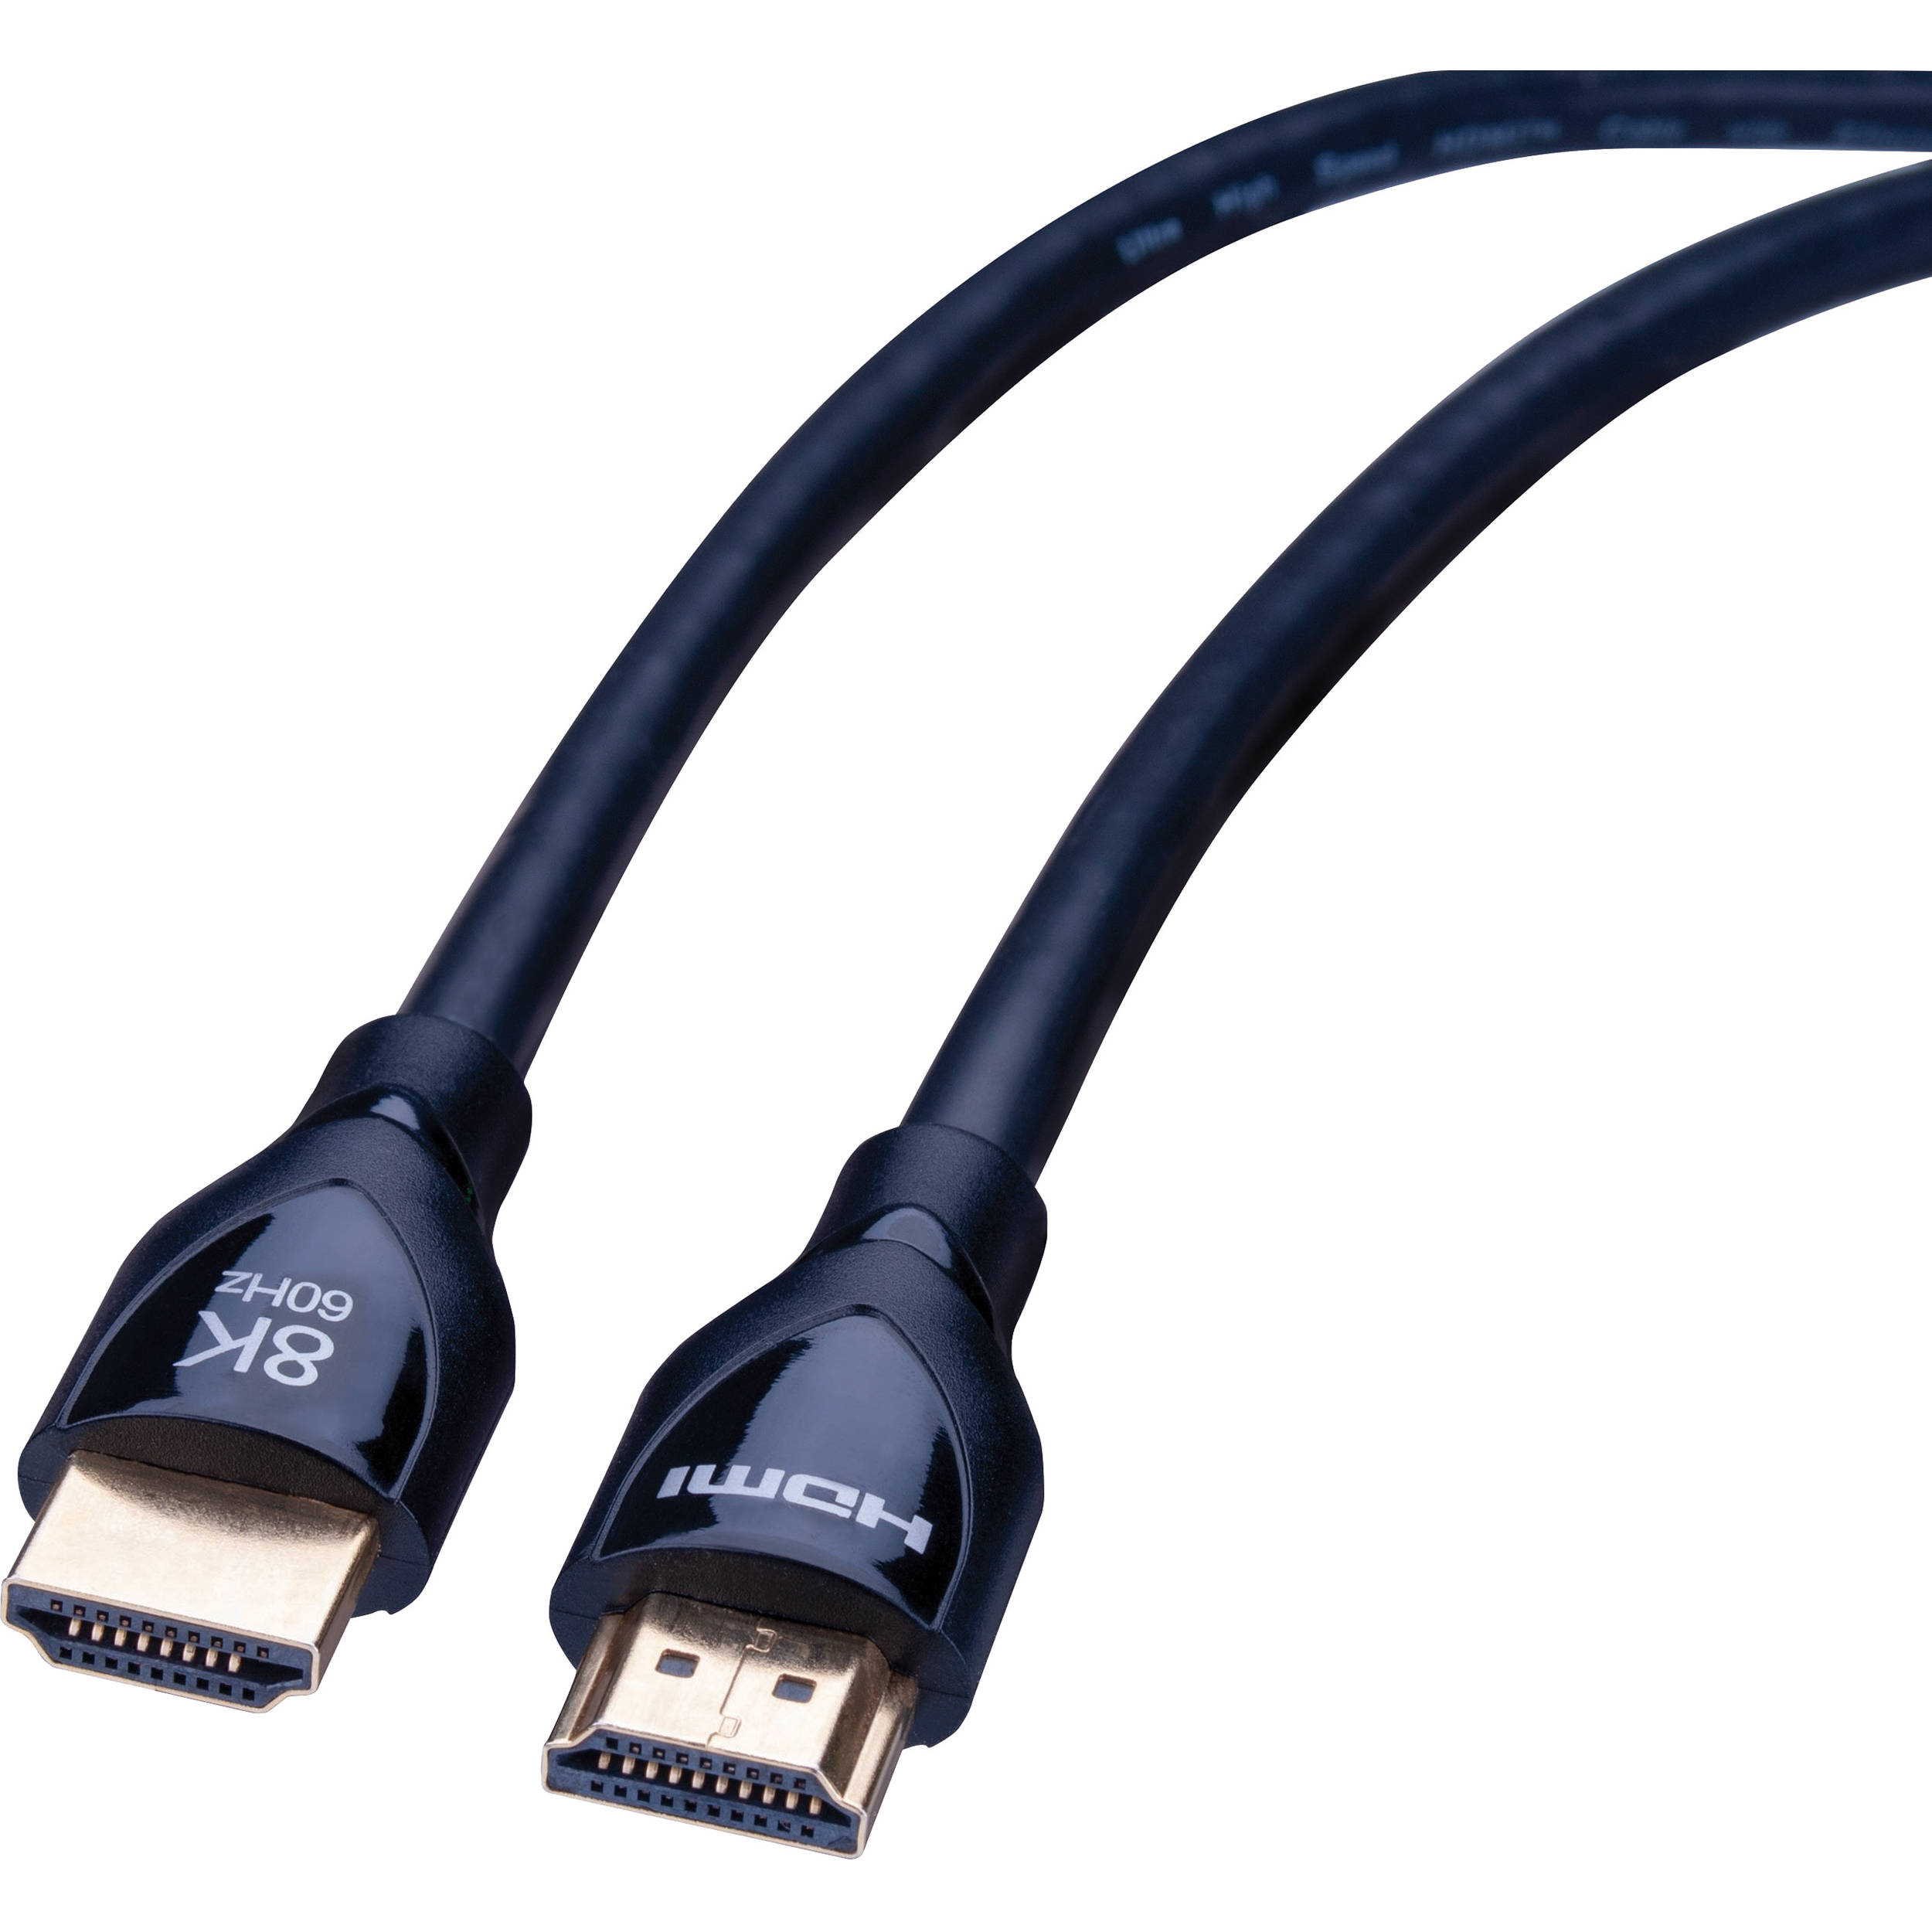 PROHD8K06 | 6' Pro Series High Speed HDMI Cable with Ethernet